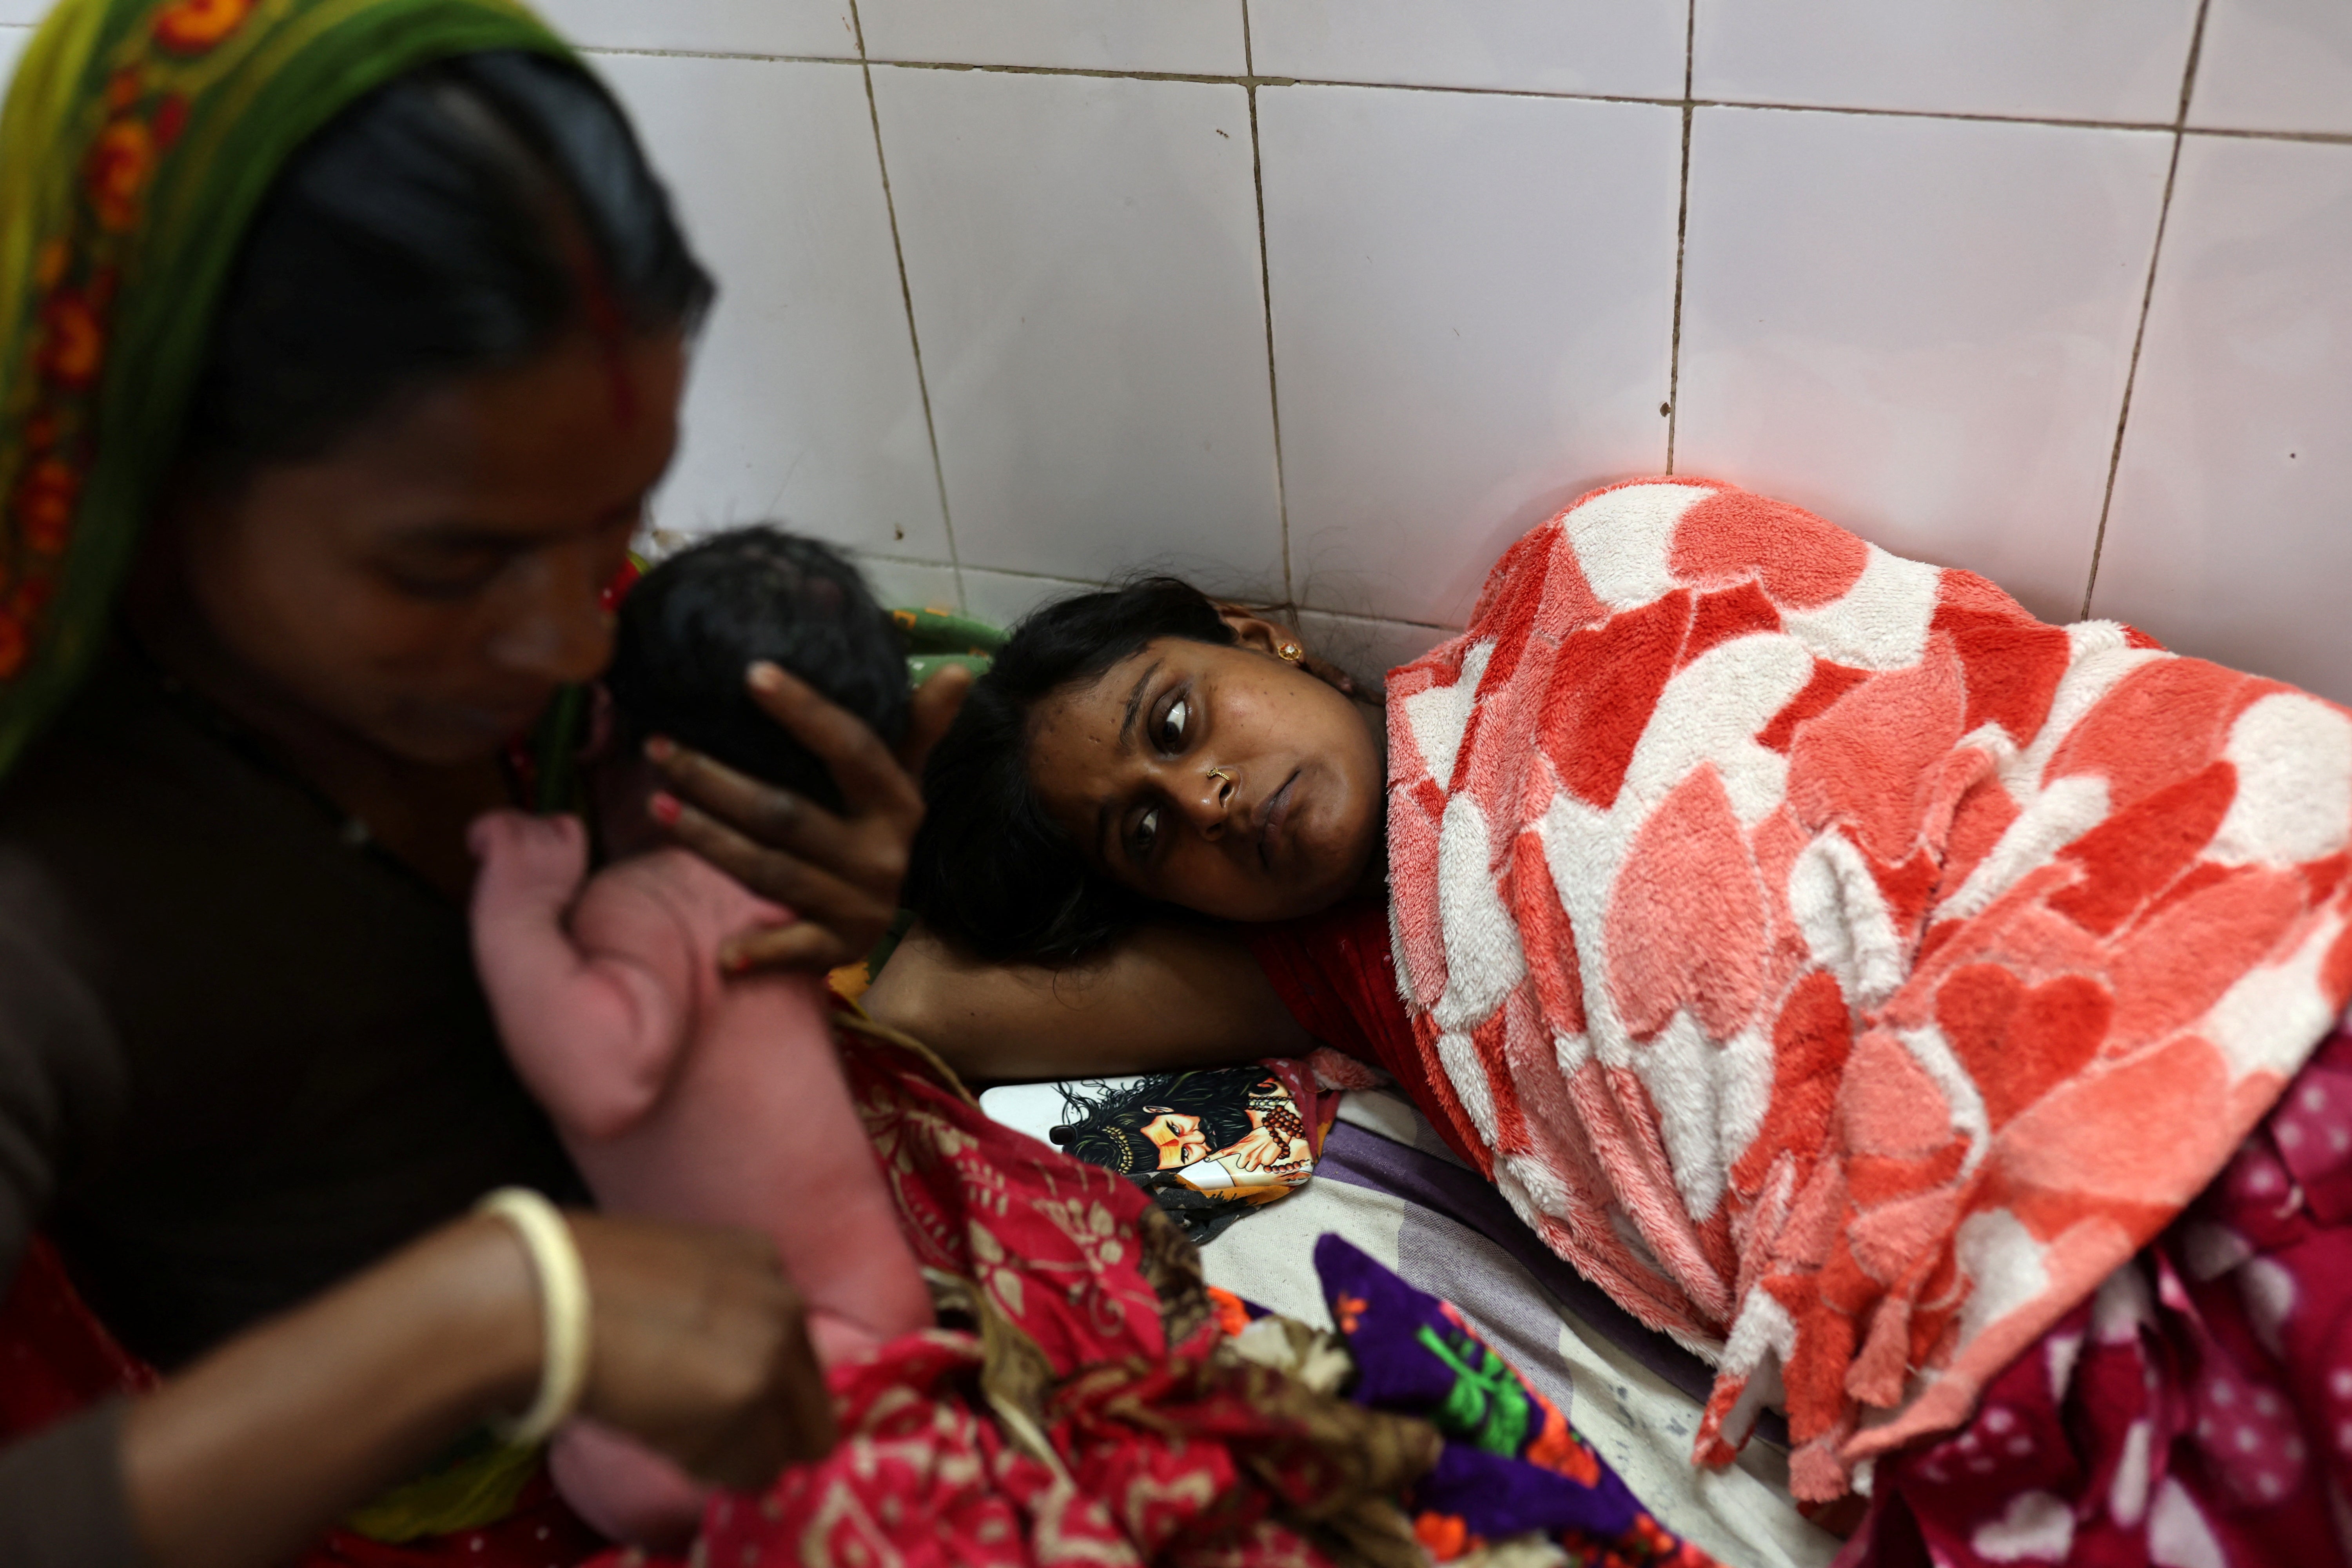 Chandani Devi rests as her mother, Ranjana, holds her newborn daughter